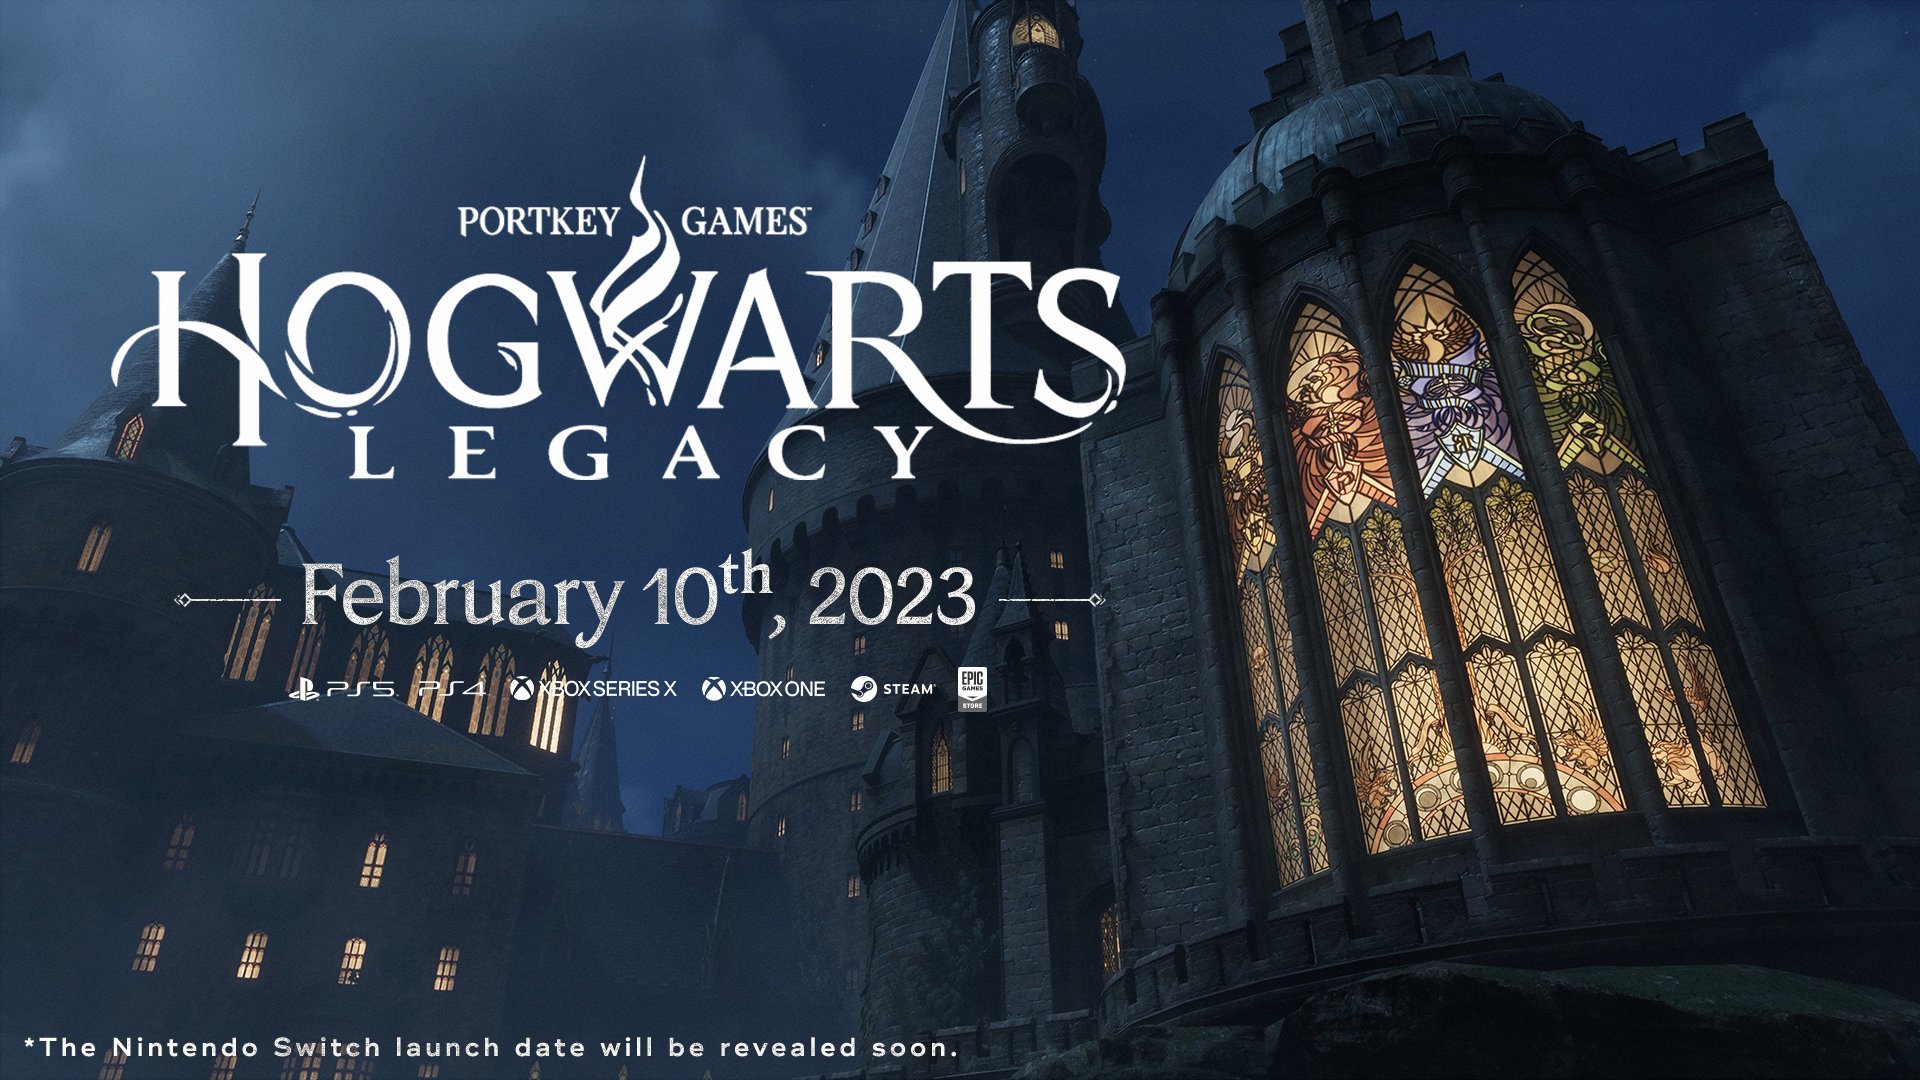 Everything we know about Hogwarts Legacy, coming Feb 10 to Epic